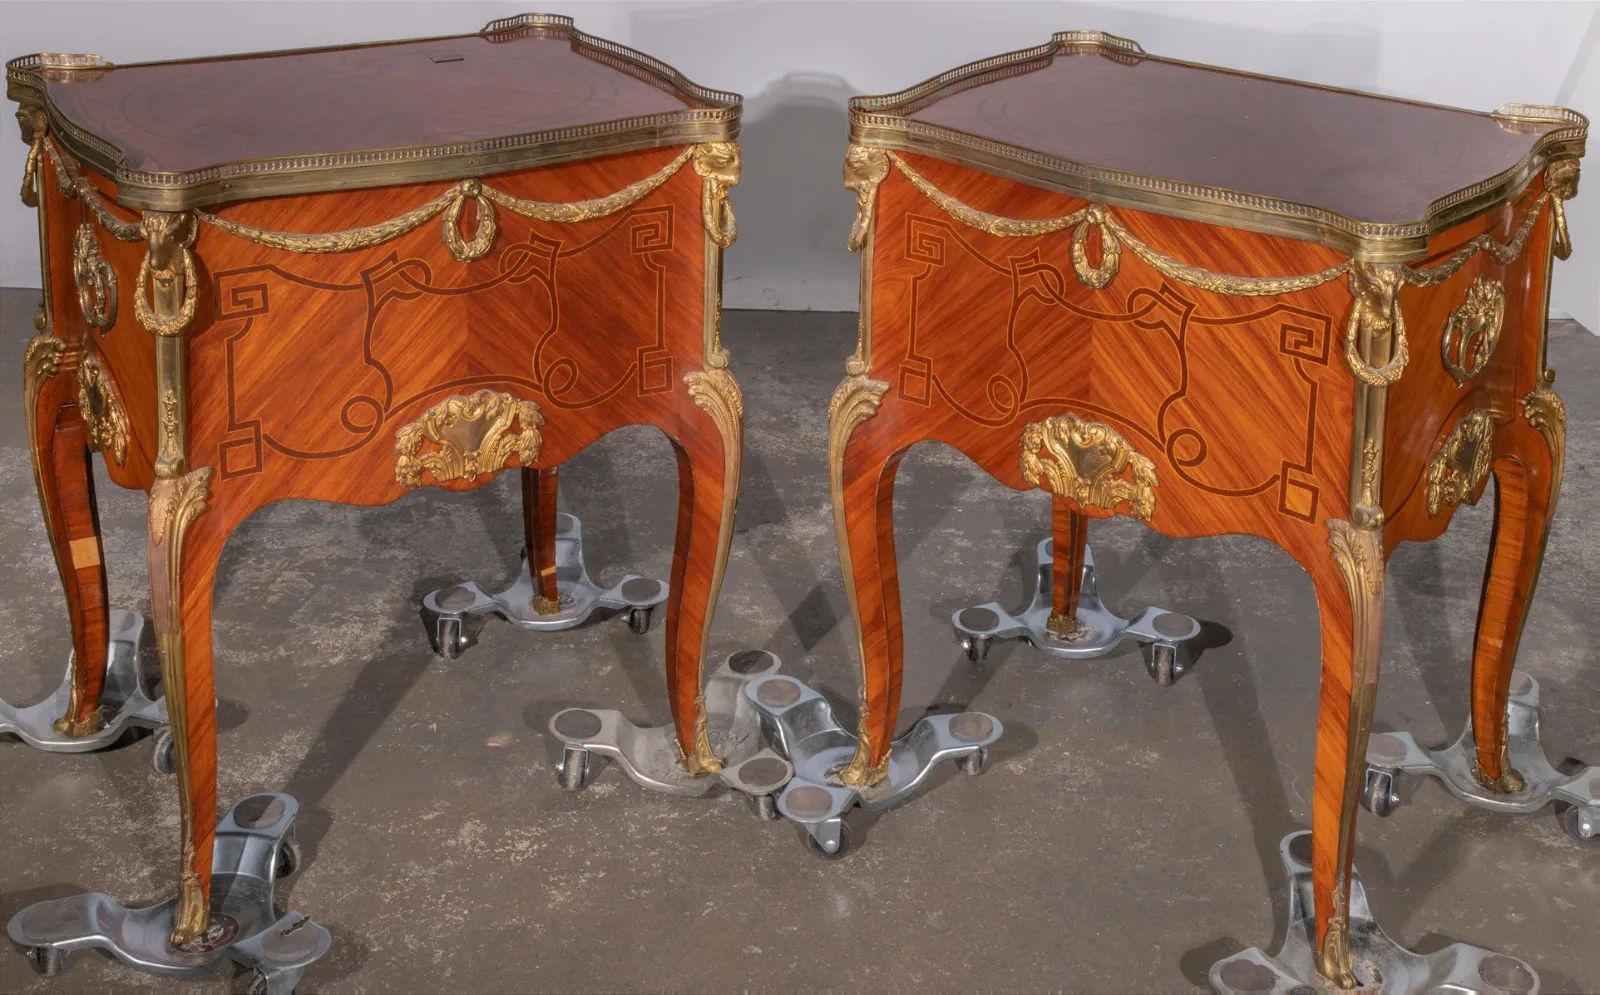 Pair of side cabinets after the original model by Jean-Francois Oeben (1721-1763), cabinet maker to the French aristocracy, including Madame de Pompadour, chief mistress to Louis XV, with rectangular shape, serpentine shaped legs, mahogany veneer